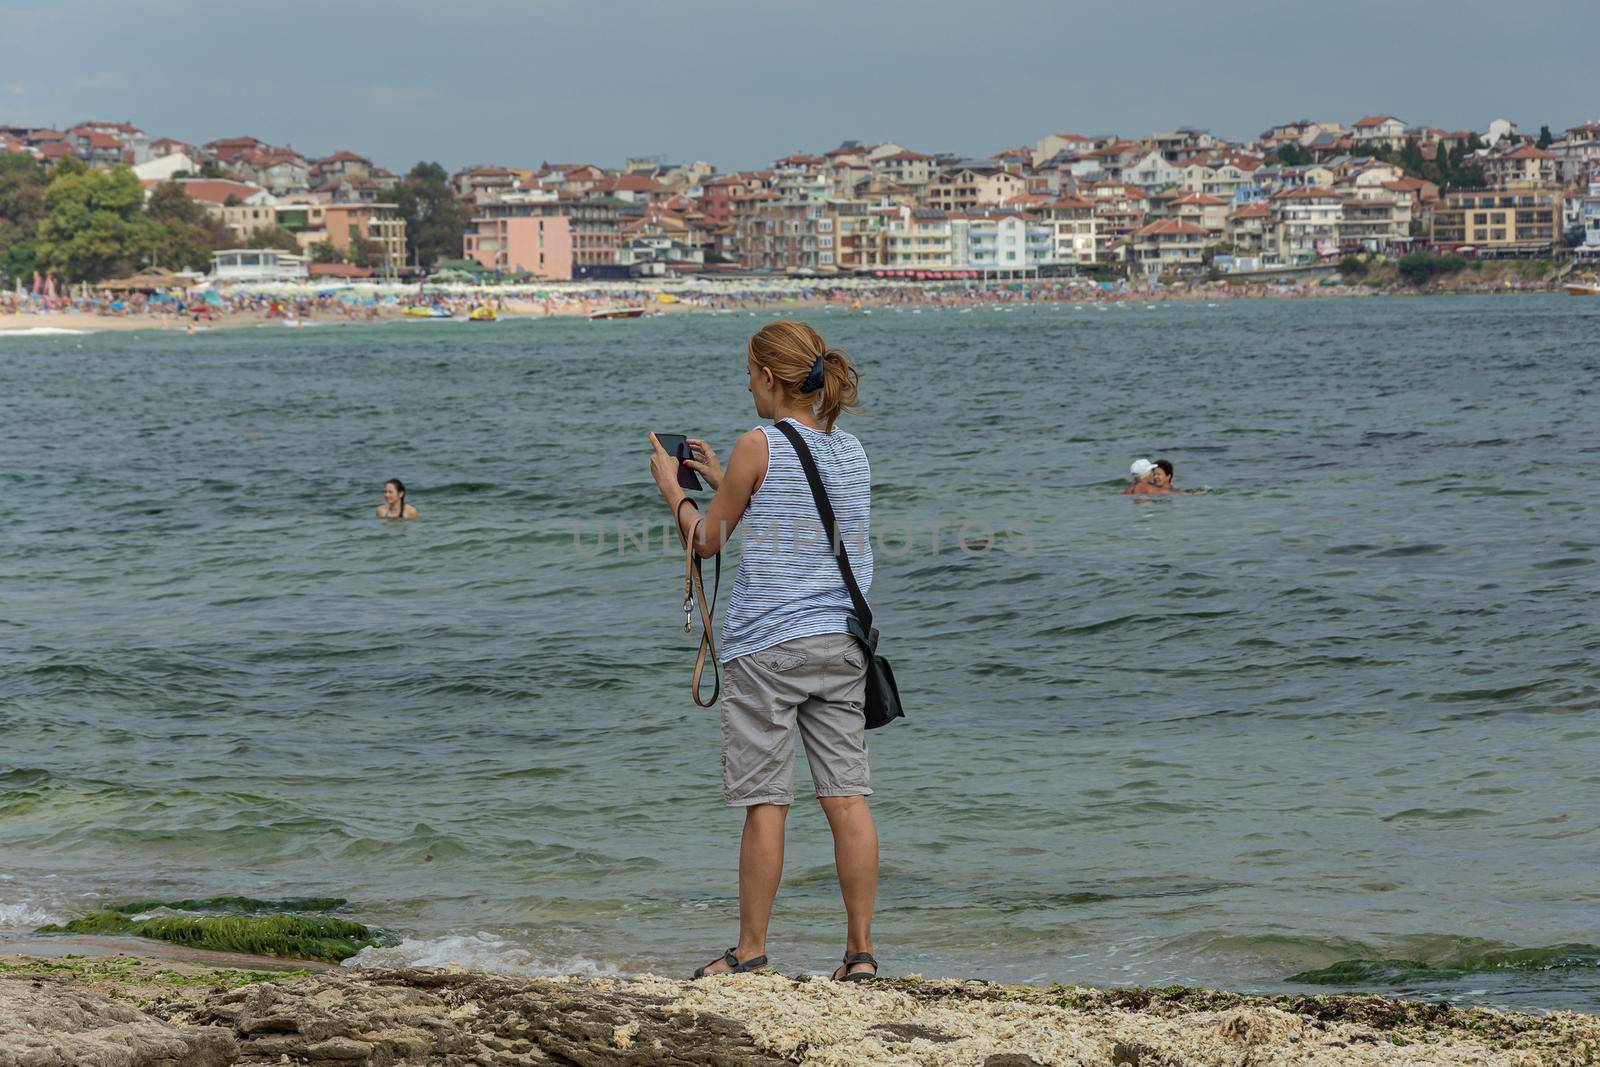 Bulgaria, Sozopol - 2018, 06 September: A woman on the beach with a smartphone, blurred background. Stock photo.